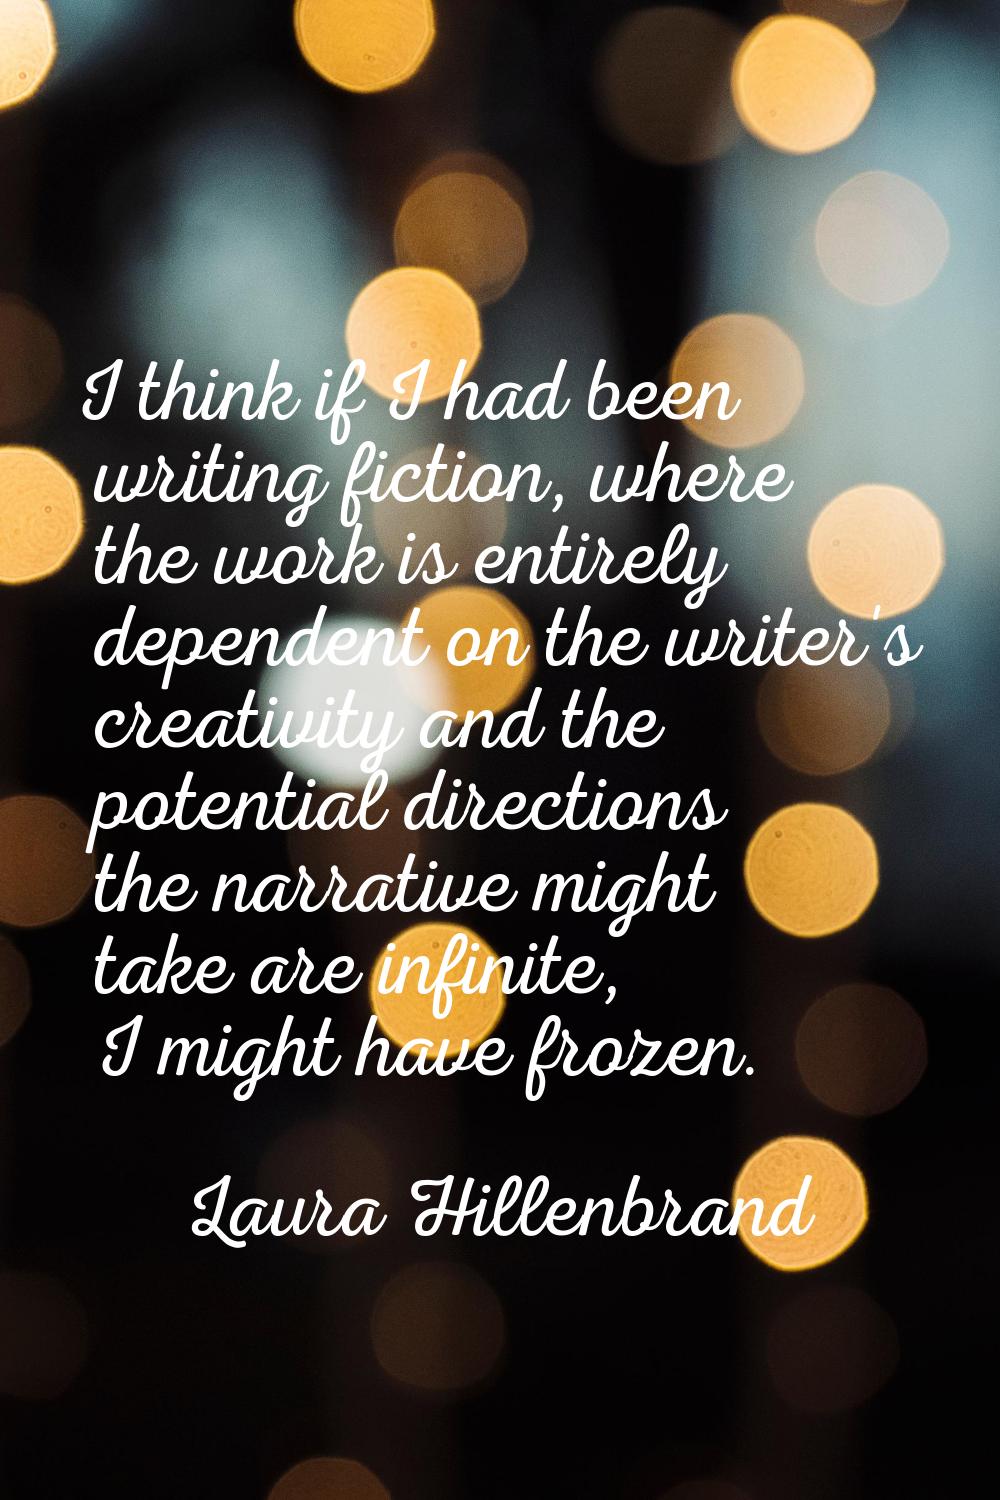 I think if I had been writing fiction, where the work is entirely dependent on the writer's creativ